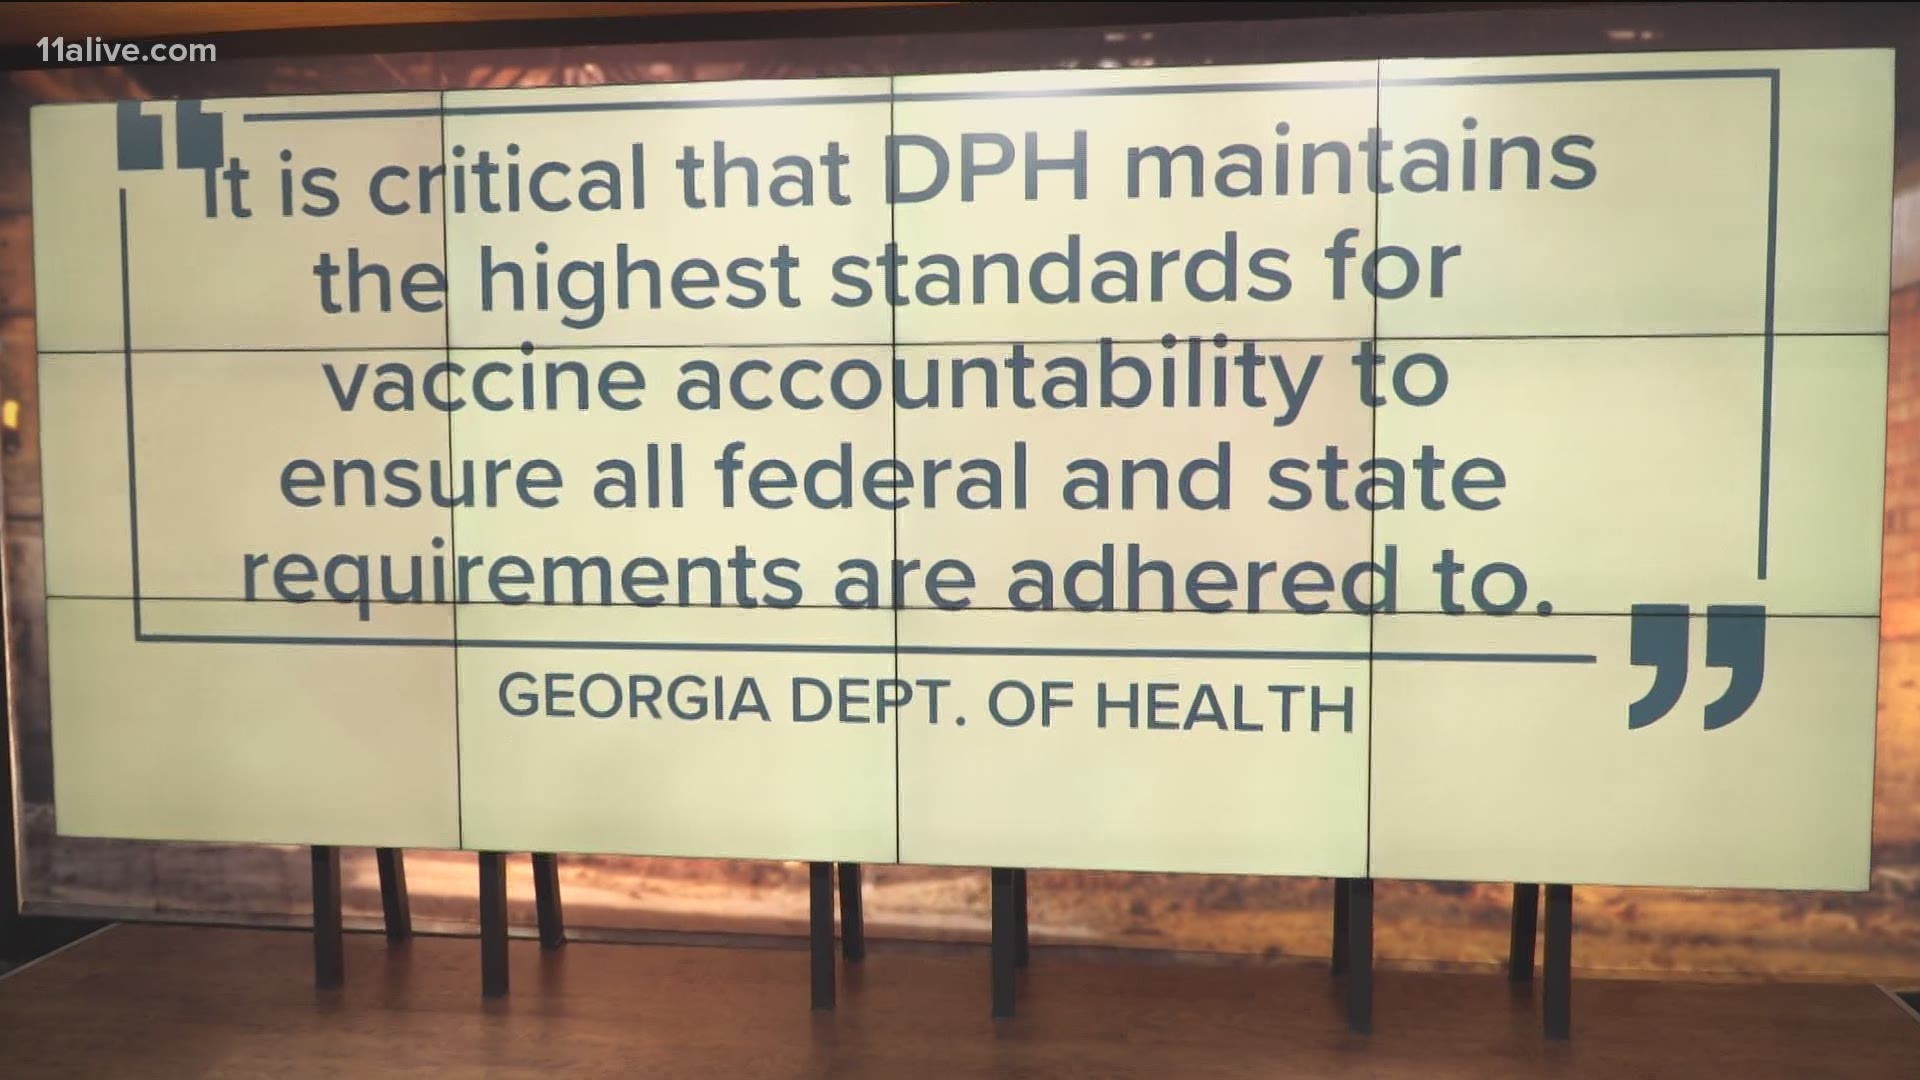 The Medical Center of Elberton will be suspended from the COVID-19 Vaccination Program in Georgia, the department of public health said.